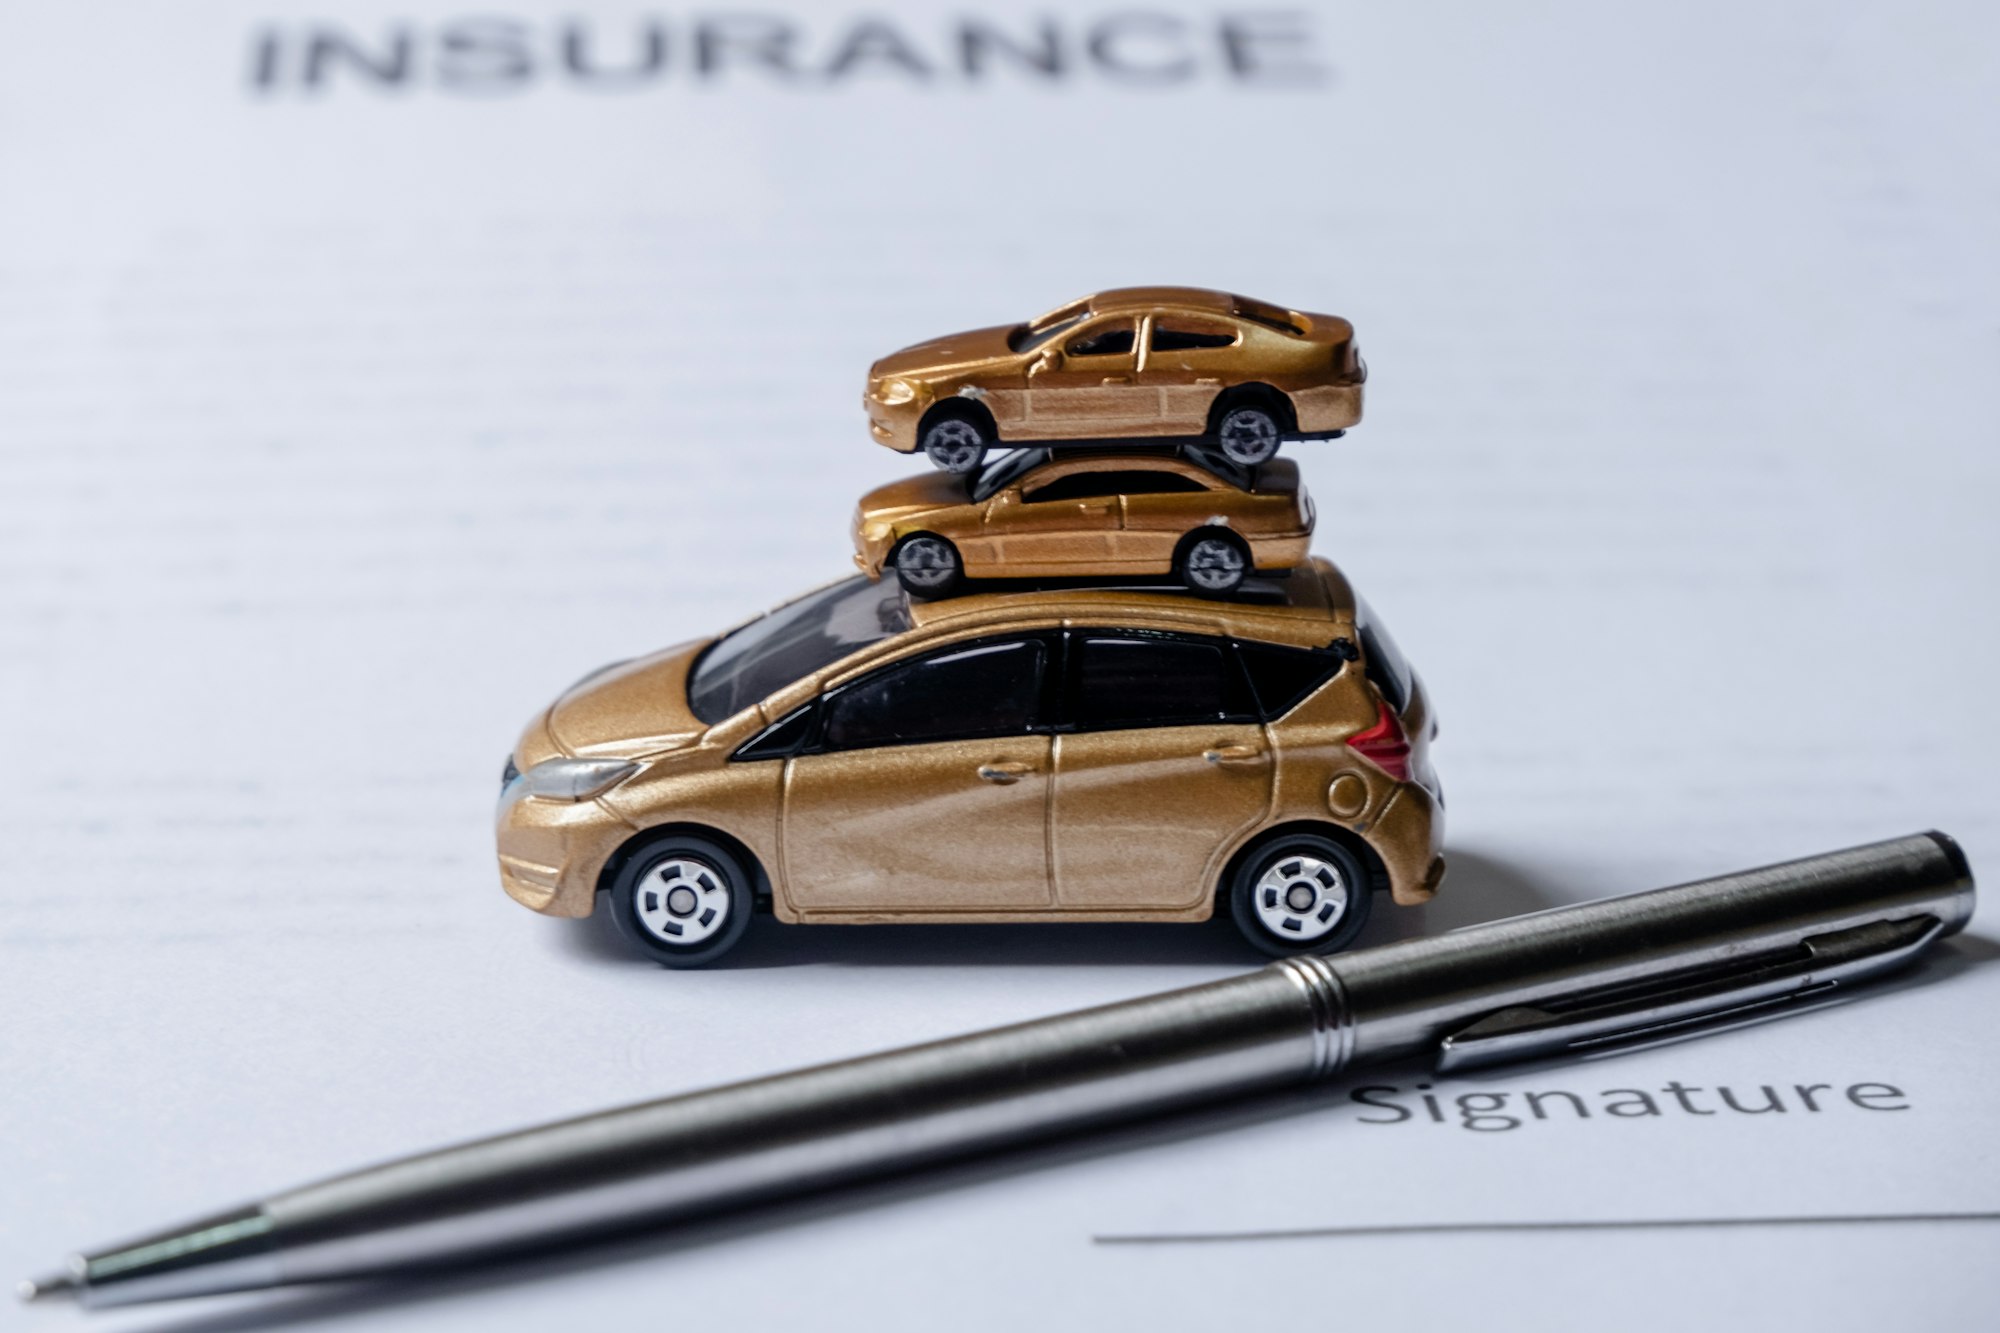 Car and pen on insurance documents. Car insurance concept.